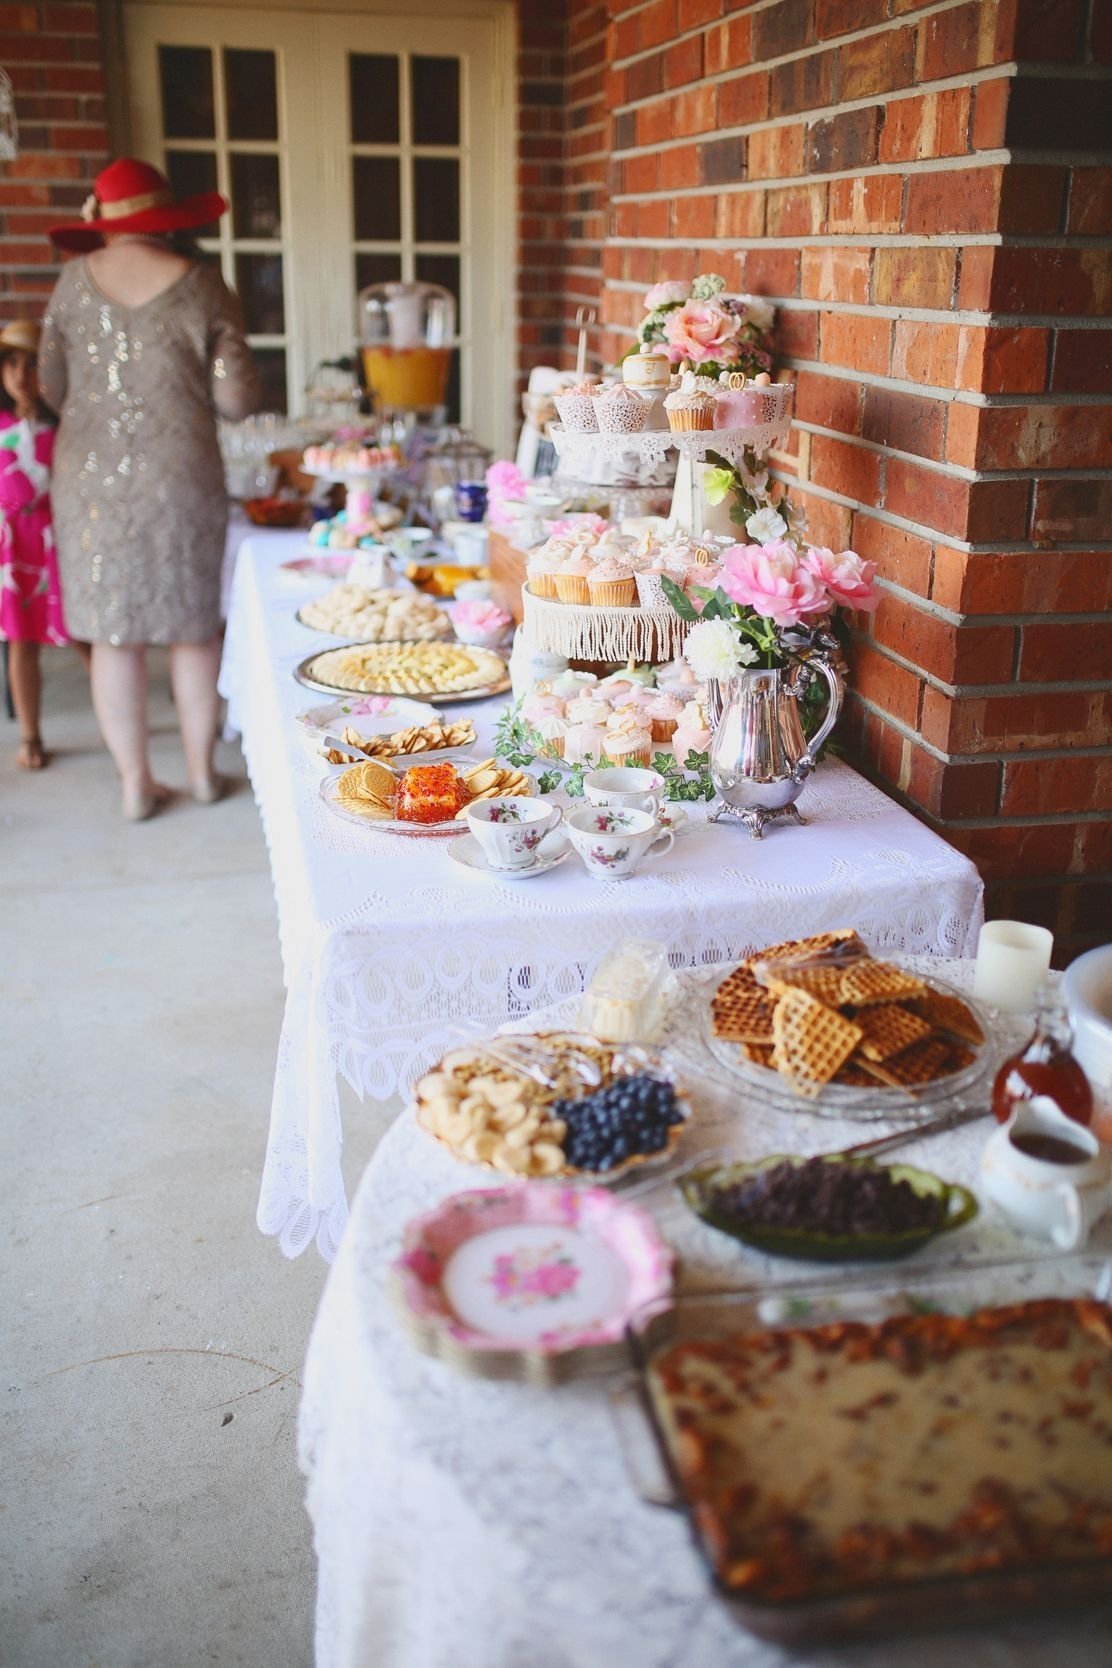 10 Attractive Shabby Chic Bridal Shower Ideas southern belle tea party themed bridal brunch shabby chic bridal 2022